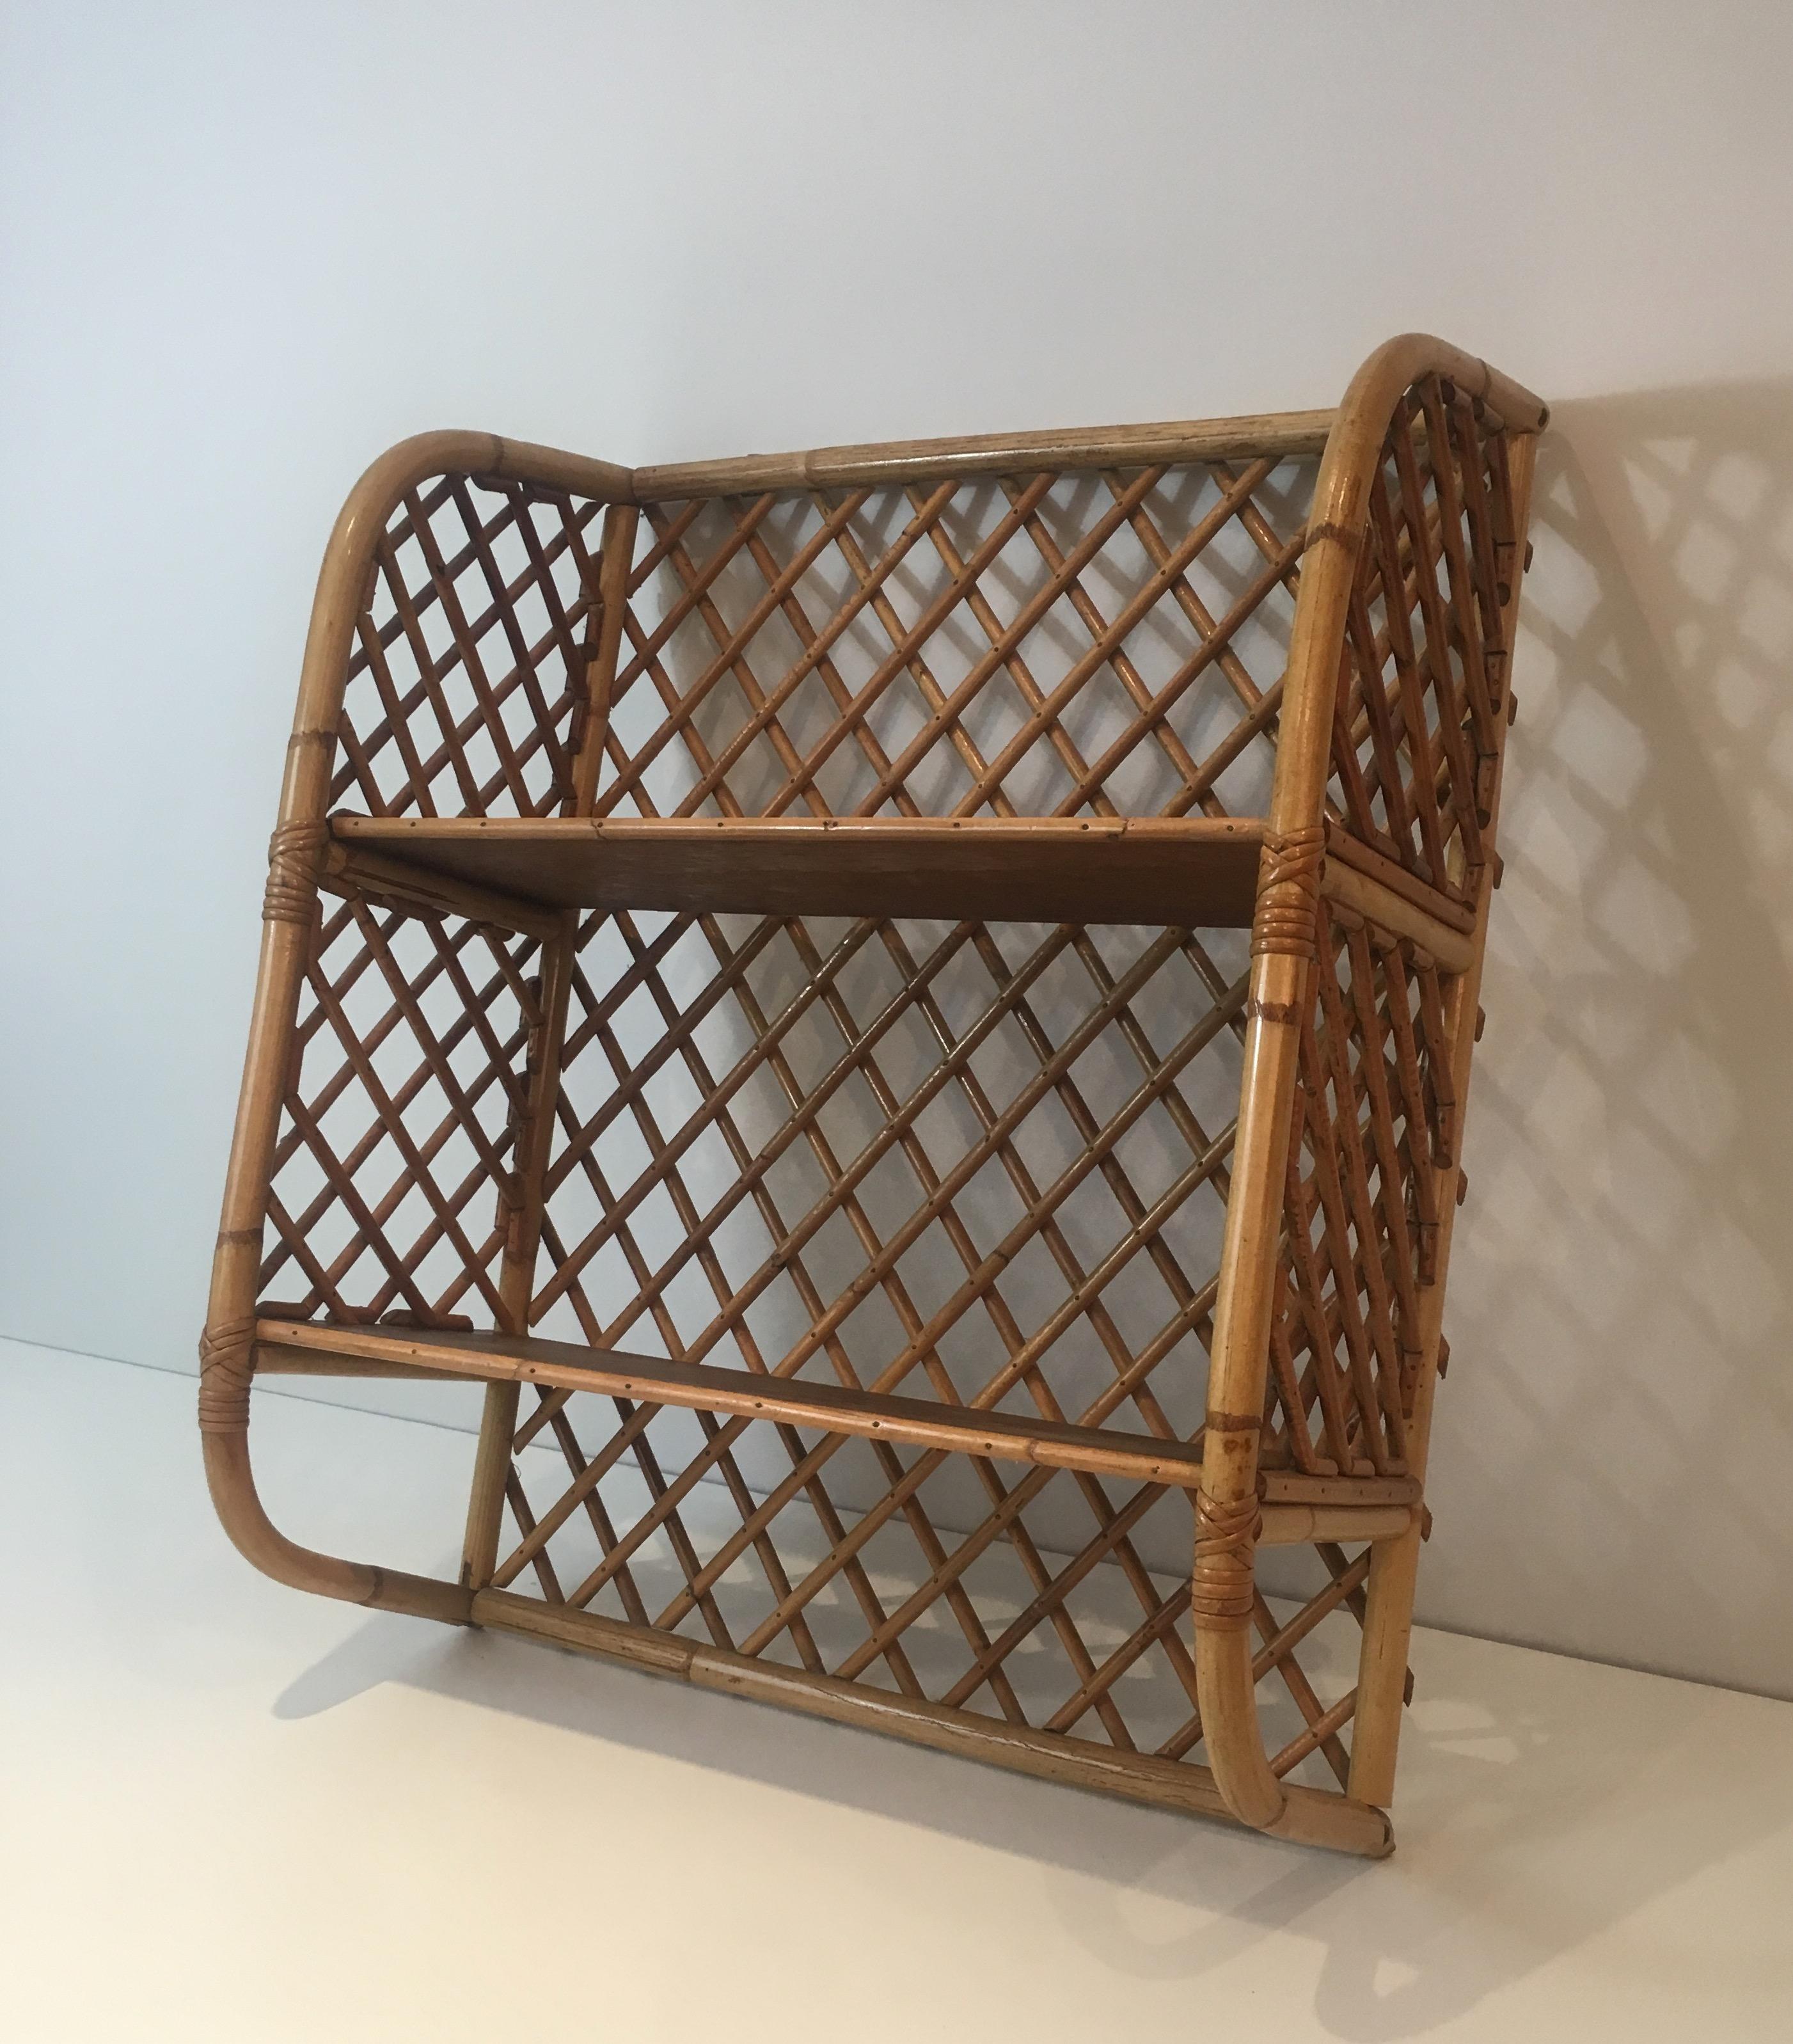 Attributed to Audoux Minet, Rattan and Wood Wall Shelves, French, circa 1950 For Sale 7